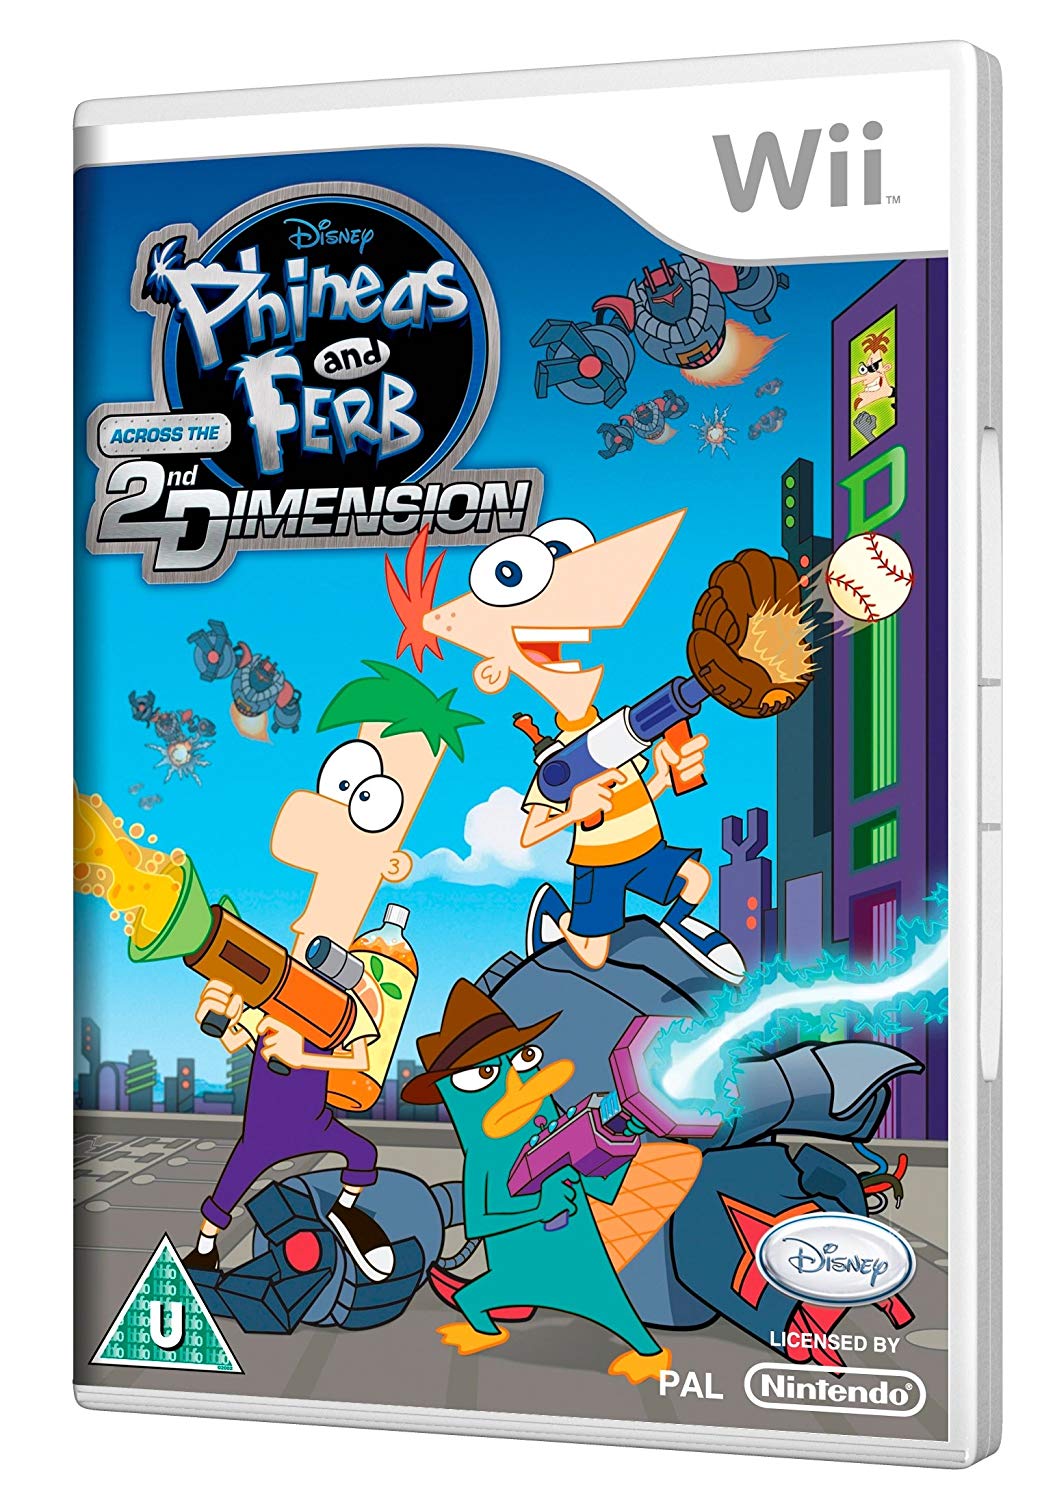 Disney Phineas and Ferb Across the 2nd Dimension